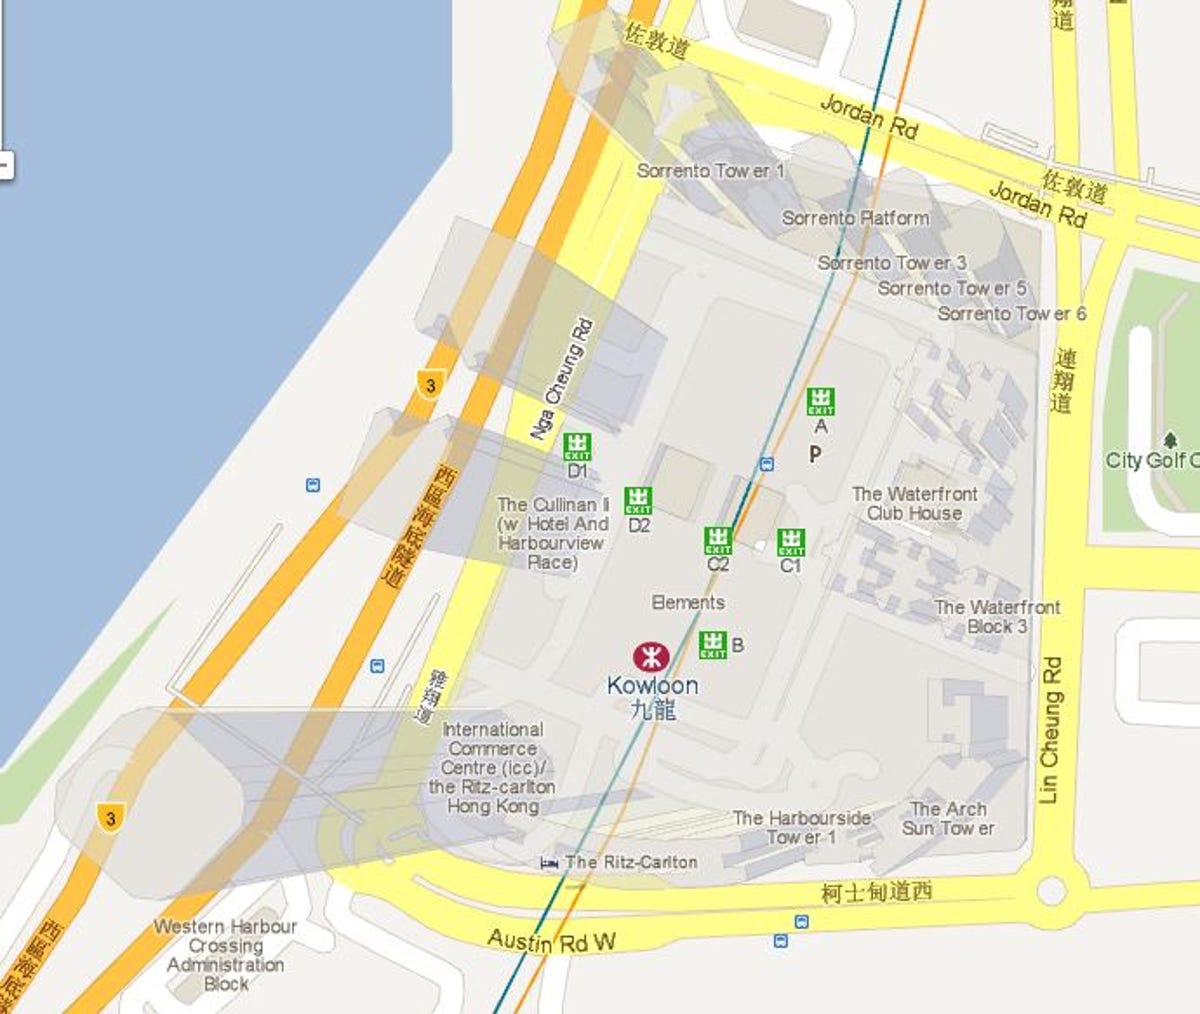 The WebGL-powered version of Google Maps shows transparent 3D buildings such as this view of Hong Kong's Kowloon area.